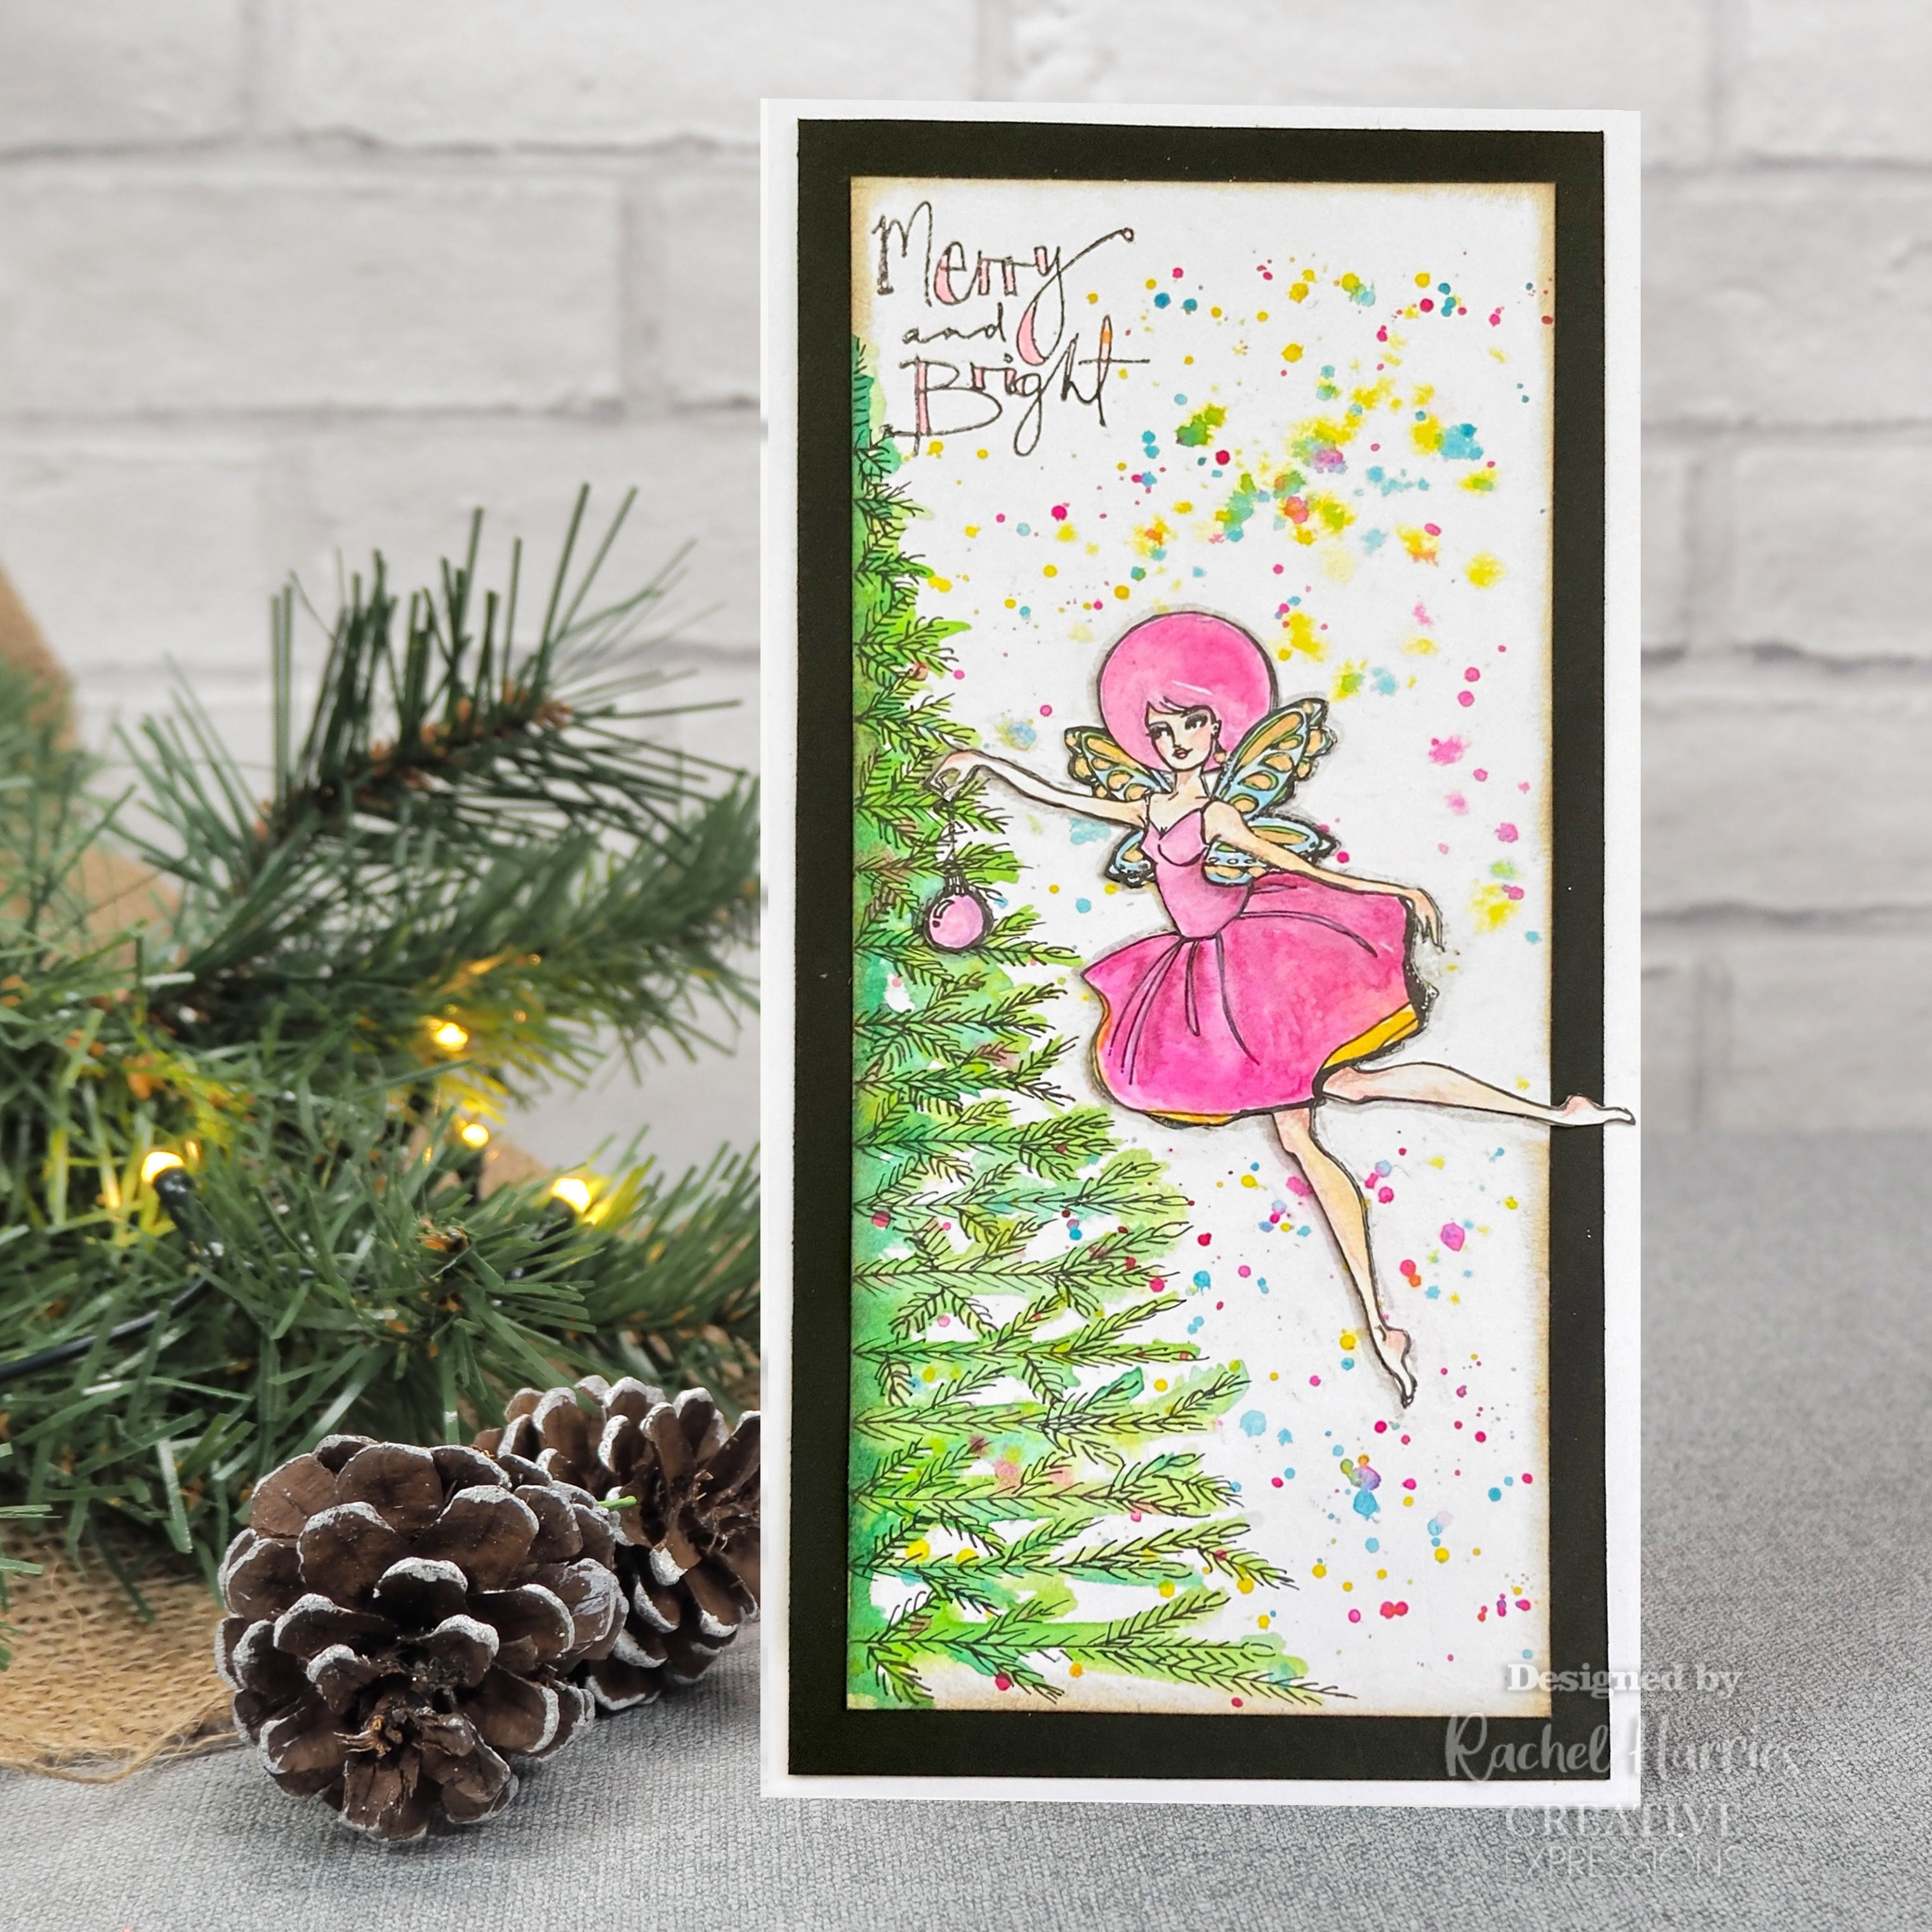 Creative Expressions Jane Davenport Snowflake Fairy 6 in x 4 in Clear Stamp Set